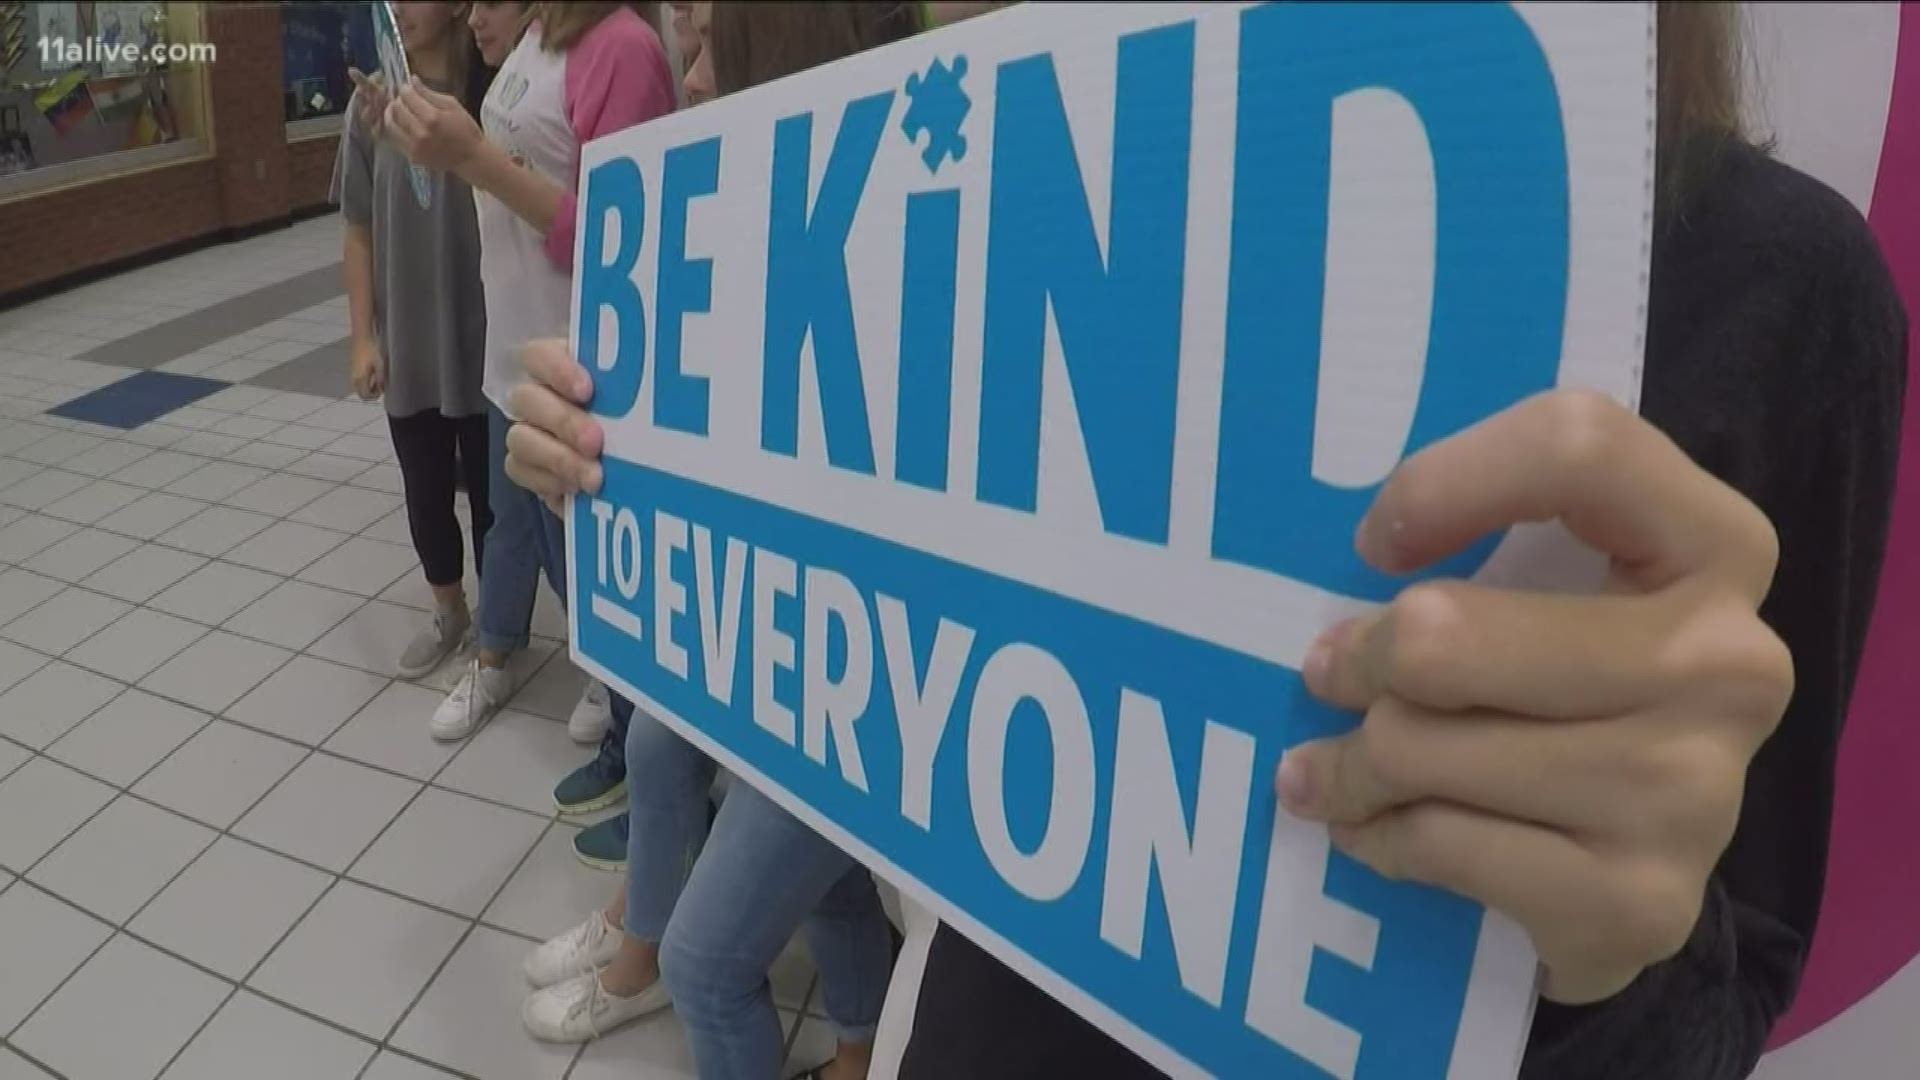 Jordyn Moore has autism. She and her family started a "Be Kind To Everyone" campaign, and it's back for the week-long celebration - with a new twist.